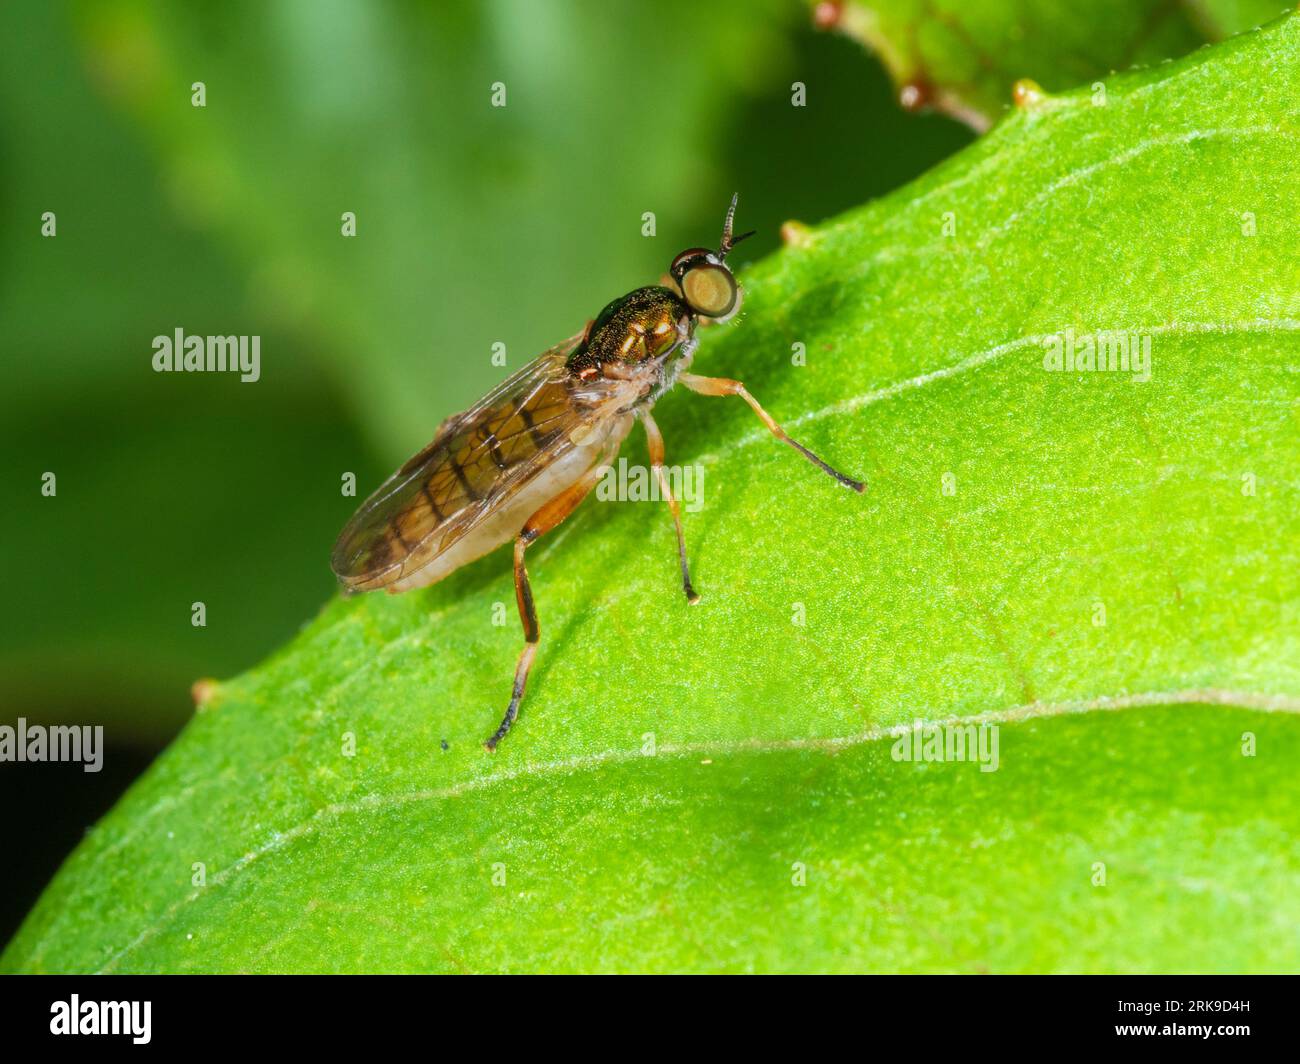 Adult female of the bright four-spined legionnaire soldier fly, Chorisops nagatomii, in a Devon, UK garden Stock Photo